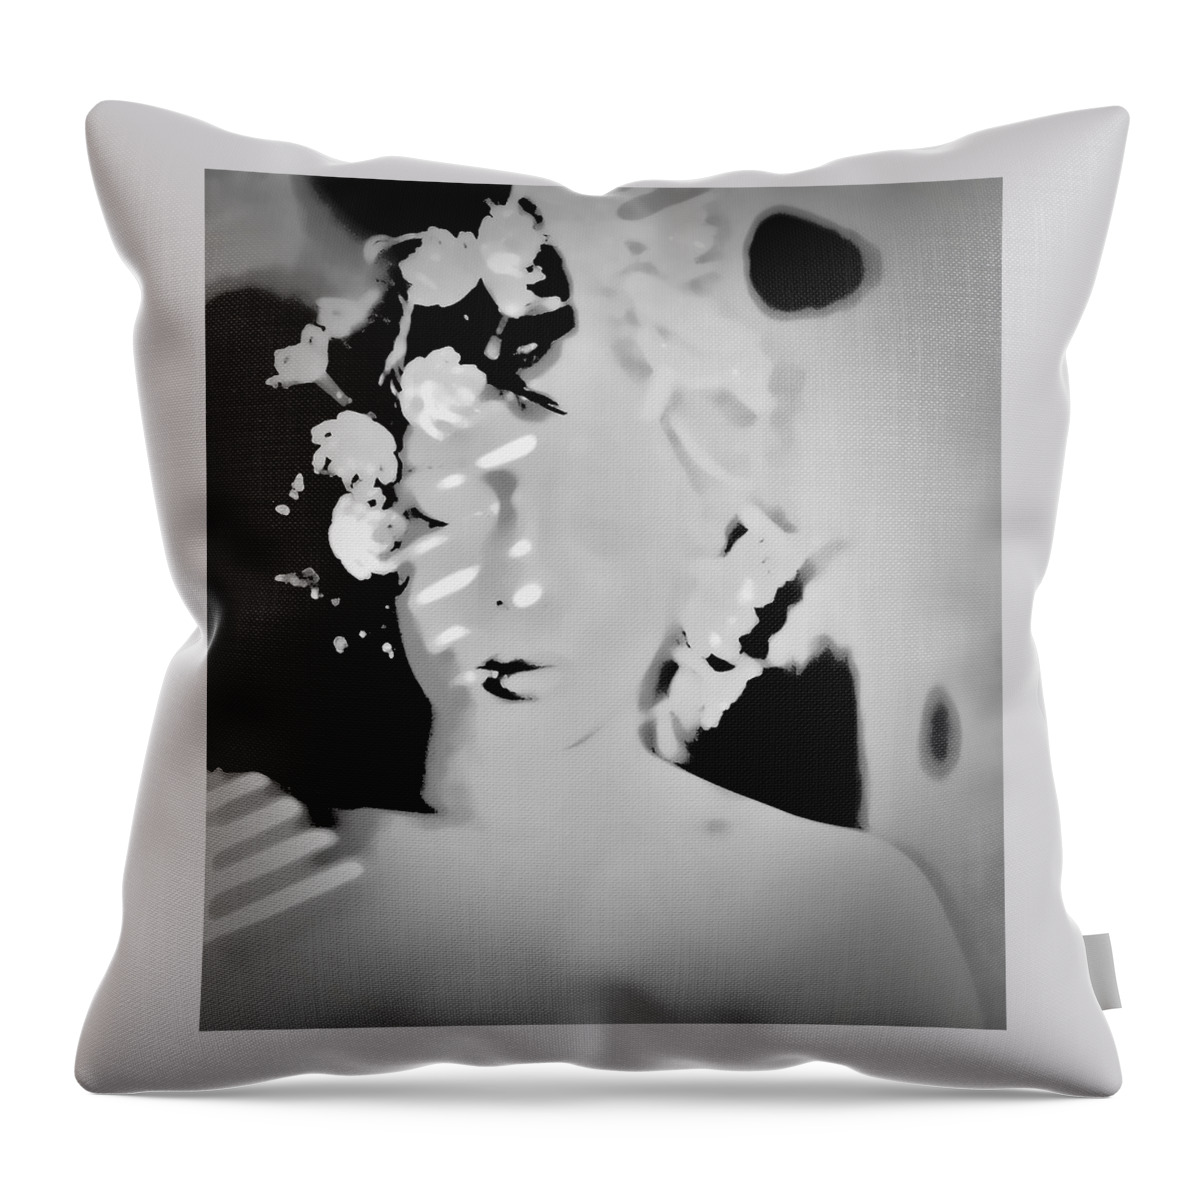 Black And White Throw Pillow featuring the photograph Poise by Jessica S